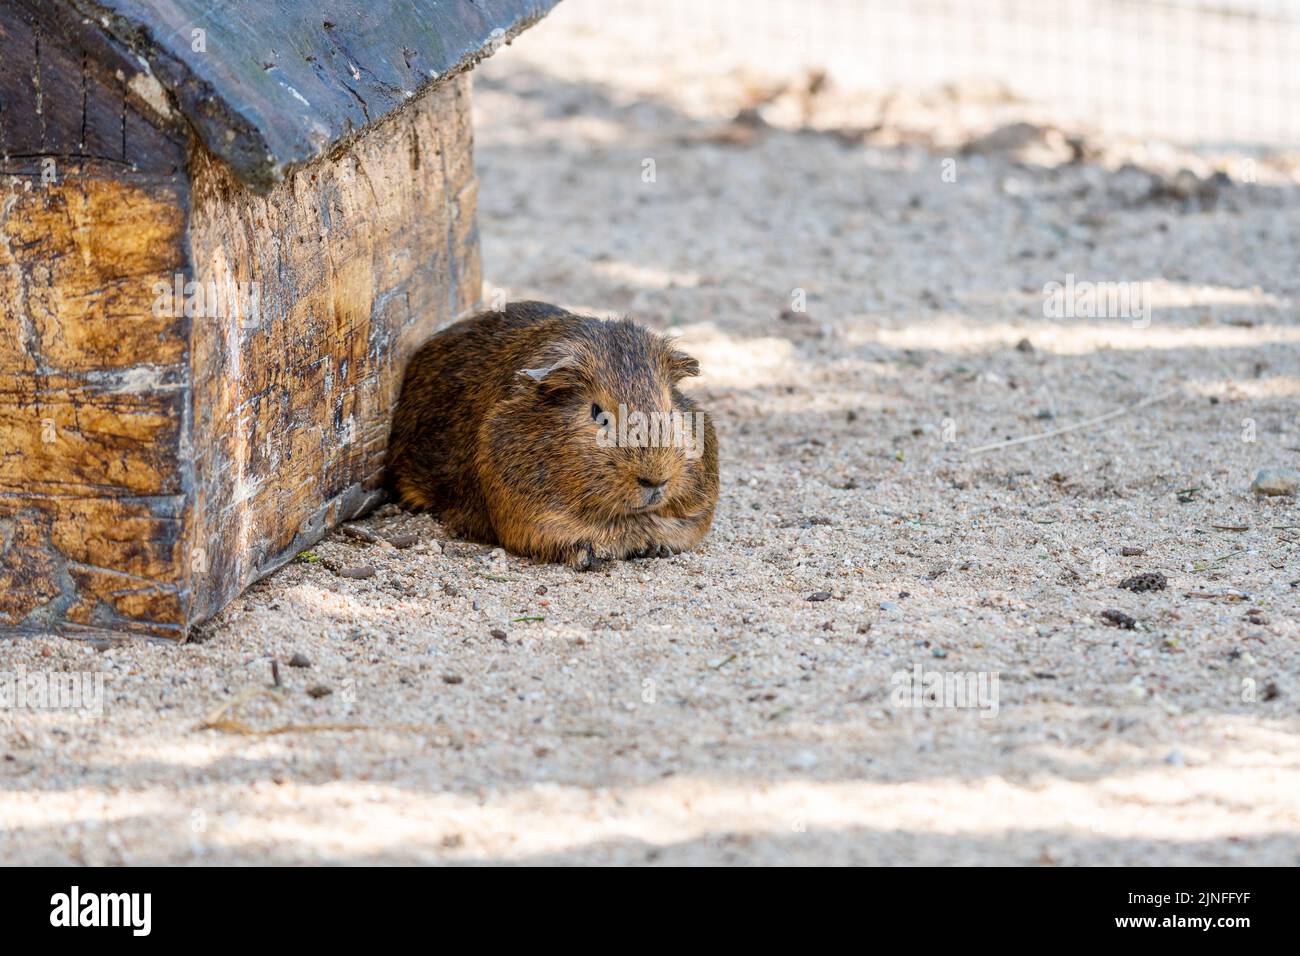 Guinea pig (latin name Cavia aperea f. porcellus) is resting near small house. Stock Photo